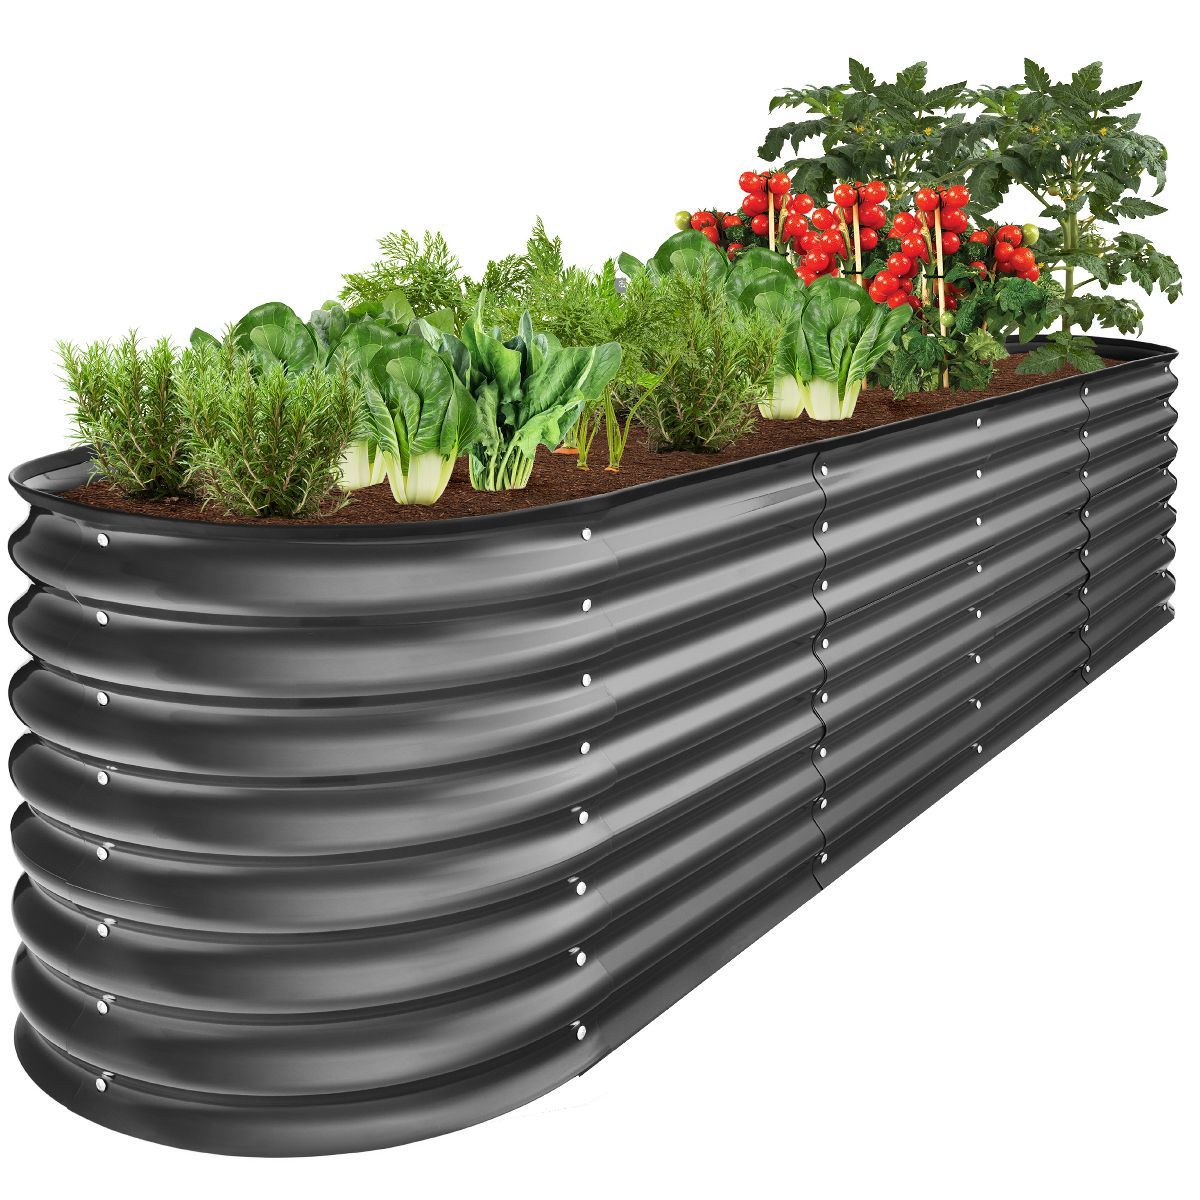 Best Choice Products 8x2x2ft Metal Raised Garden Bed, Oval Outdoor Planter Box w/ 4 Support Bars | Target